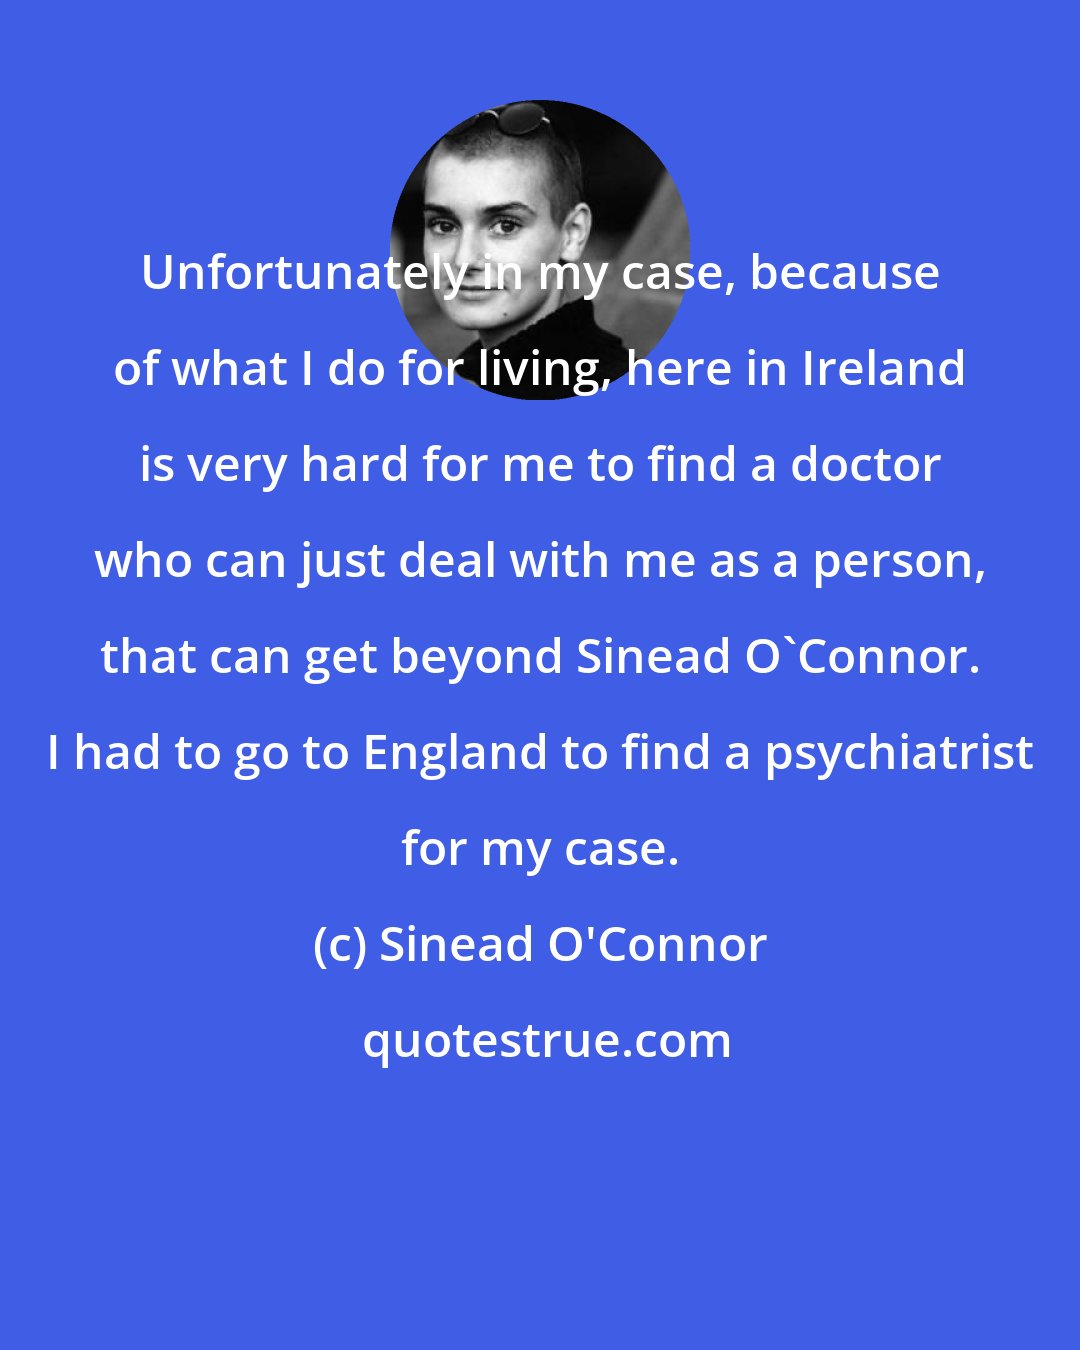 Sinead O'Connor: Unfortunately in my case, because of what I do for living, here in Ireland is very hard for me to find a doctor who can just deal with me as a person, that can get beyond Sinead O'Connor. I had to go to England to find a psychiatrist for my case.